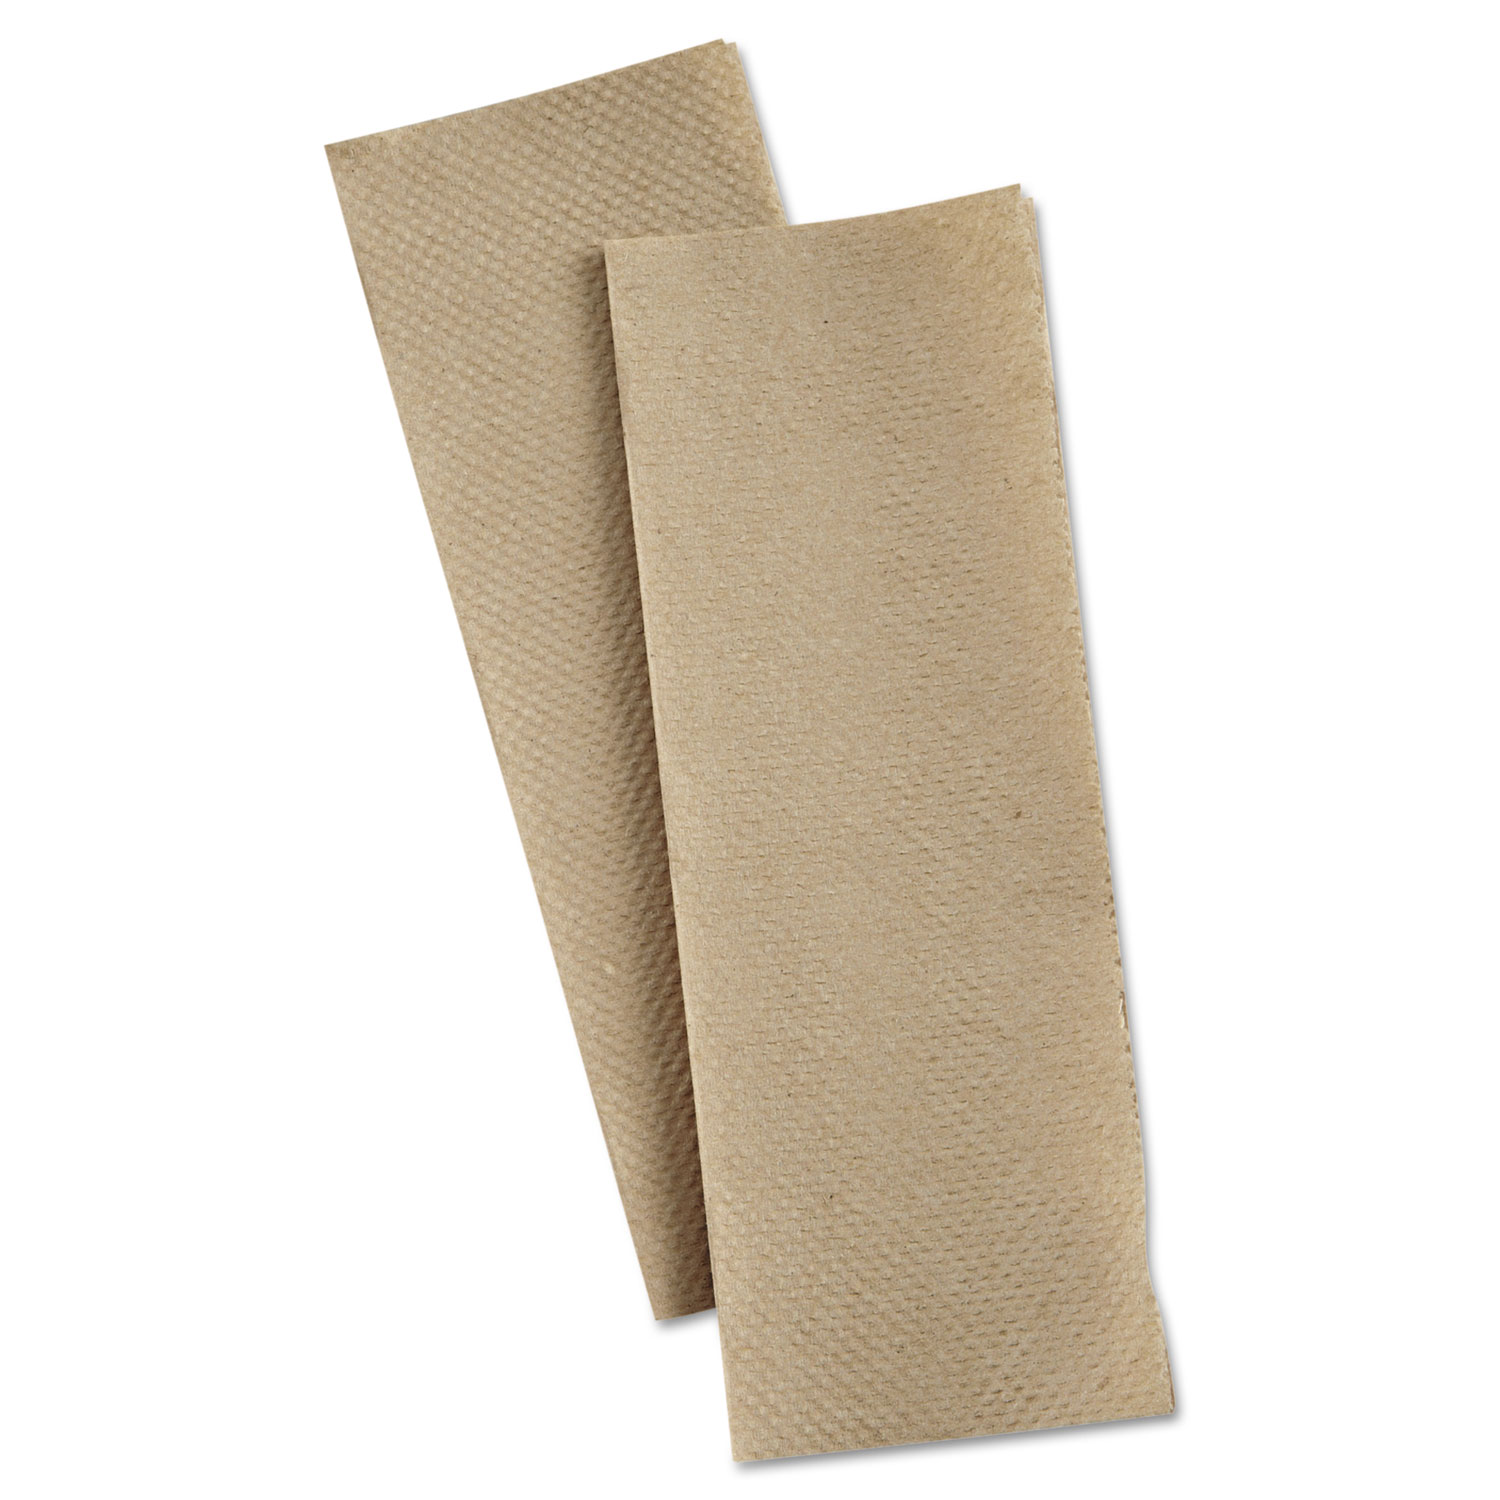  Penny Lane PNL8202 Multifold Paper Towels, 9 1/4 x 9 1/2, Natural, 250/Pack (PNL8202) 